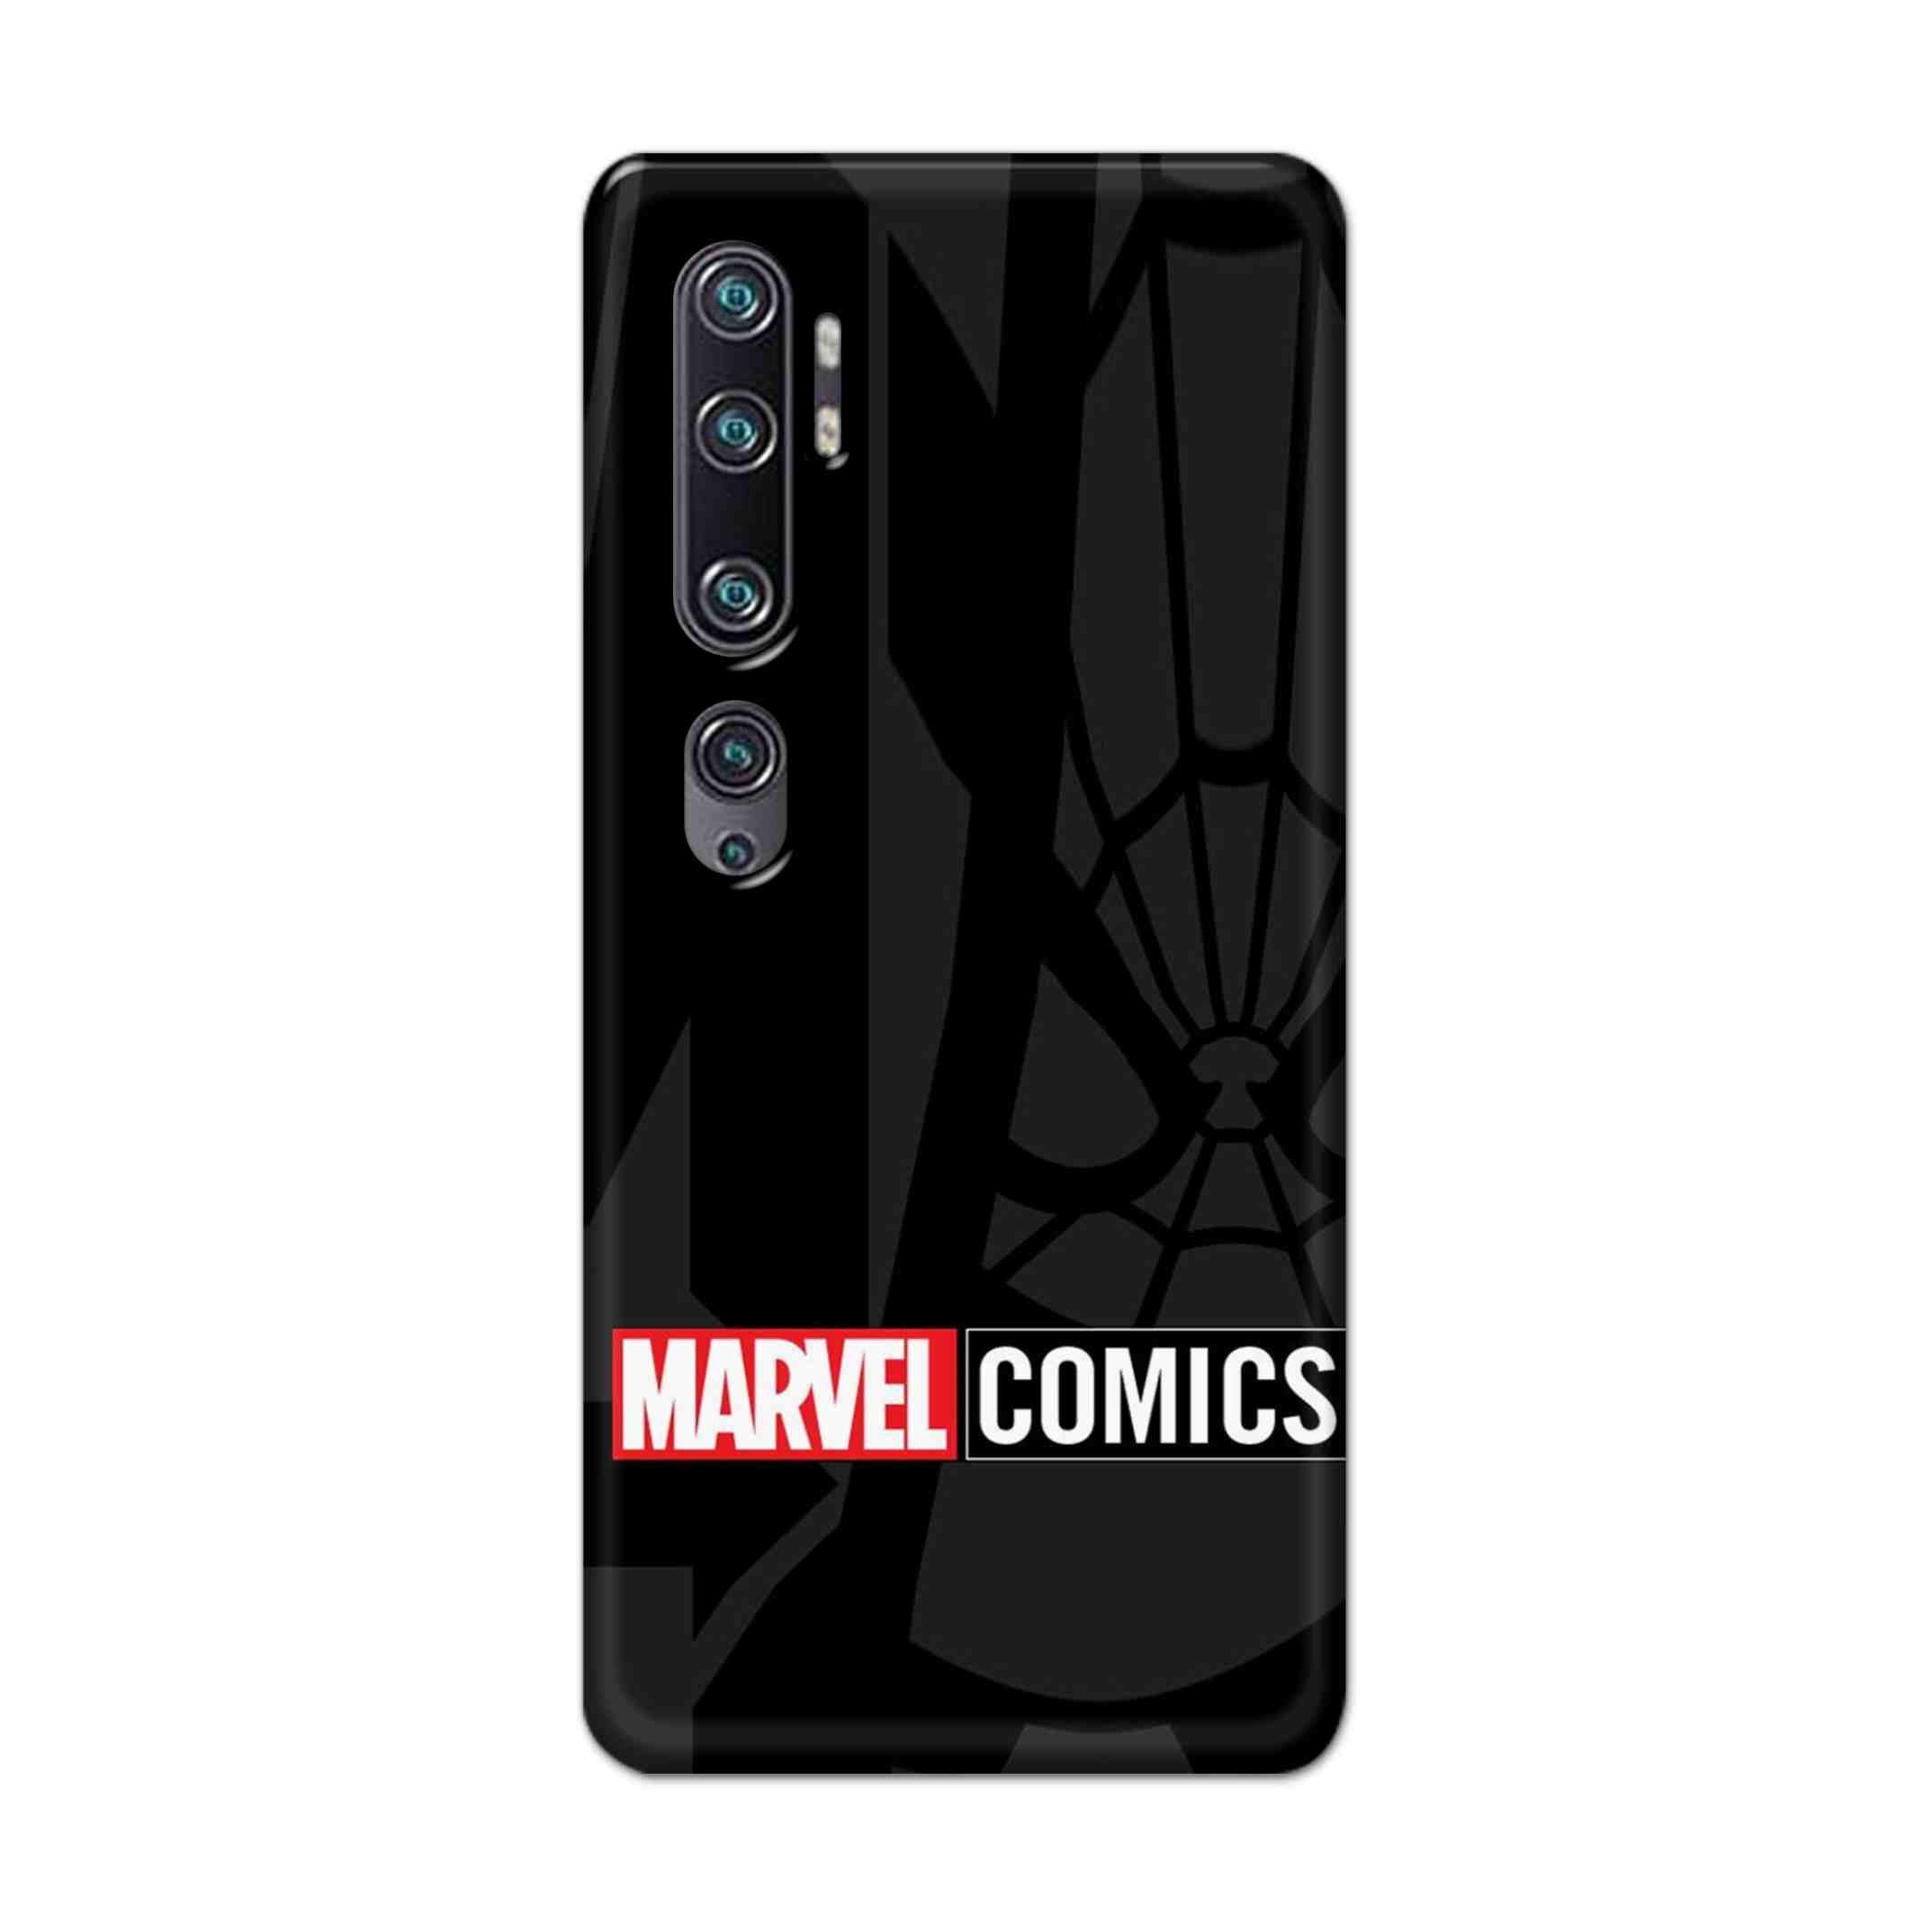 Buy Marvel Comics Hard Back Mobile Phone Case Cover For Xiaomi Mi Note 10 Online